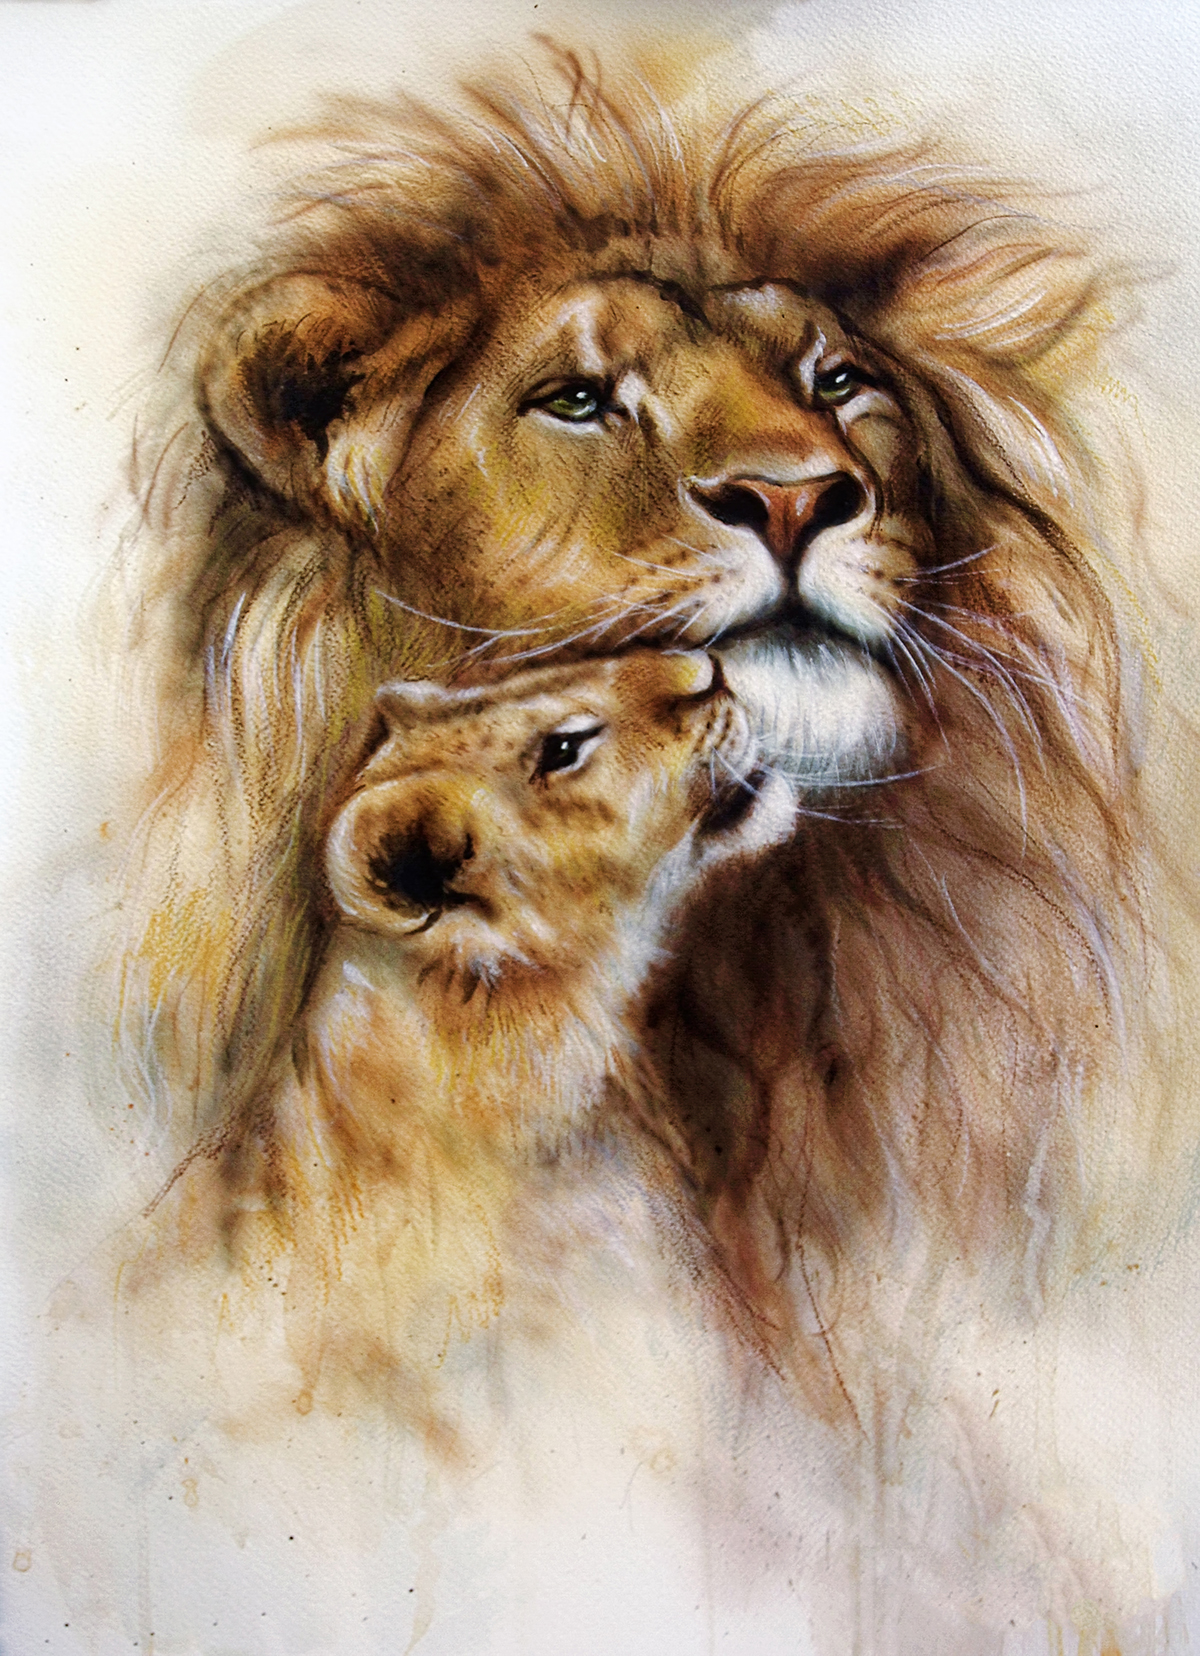 A lion and a tiger